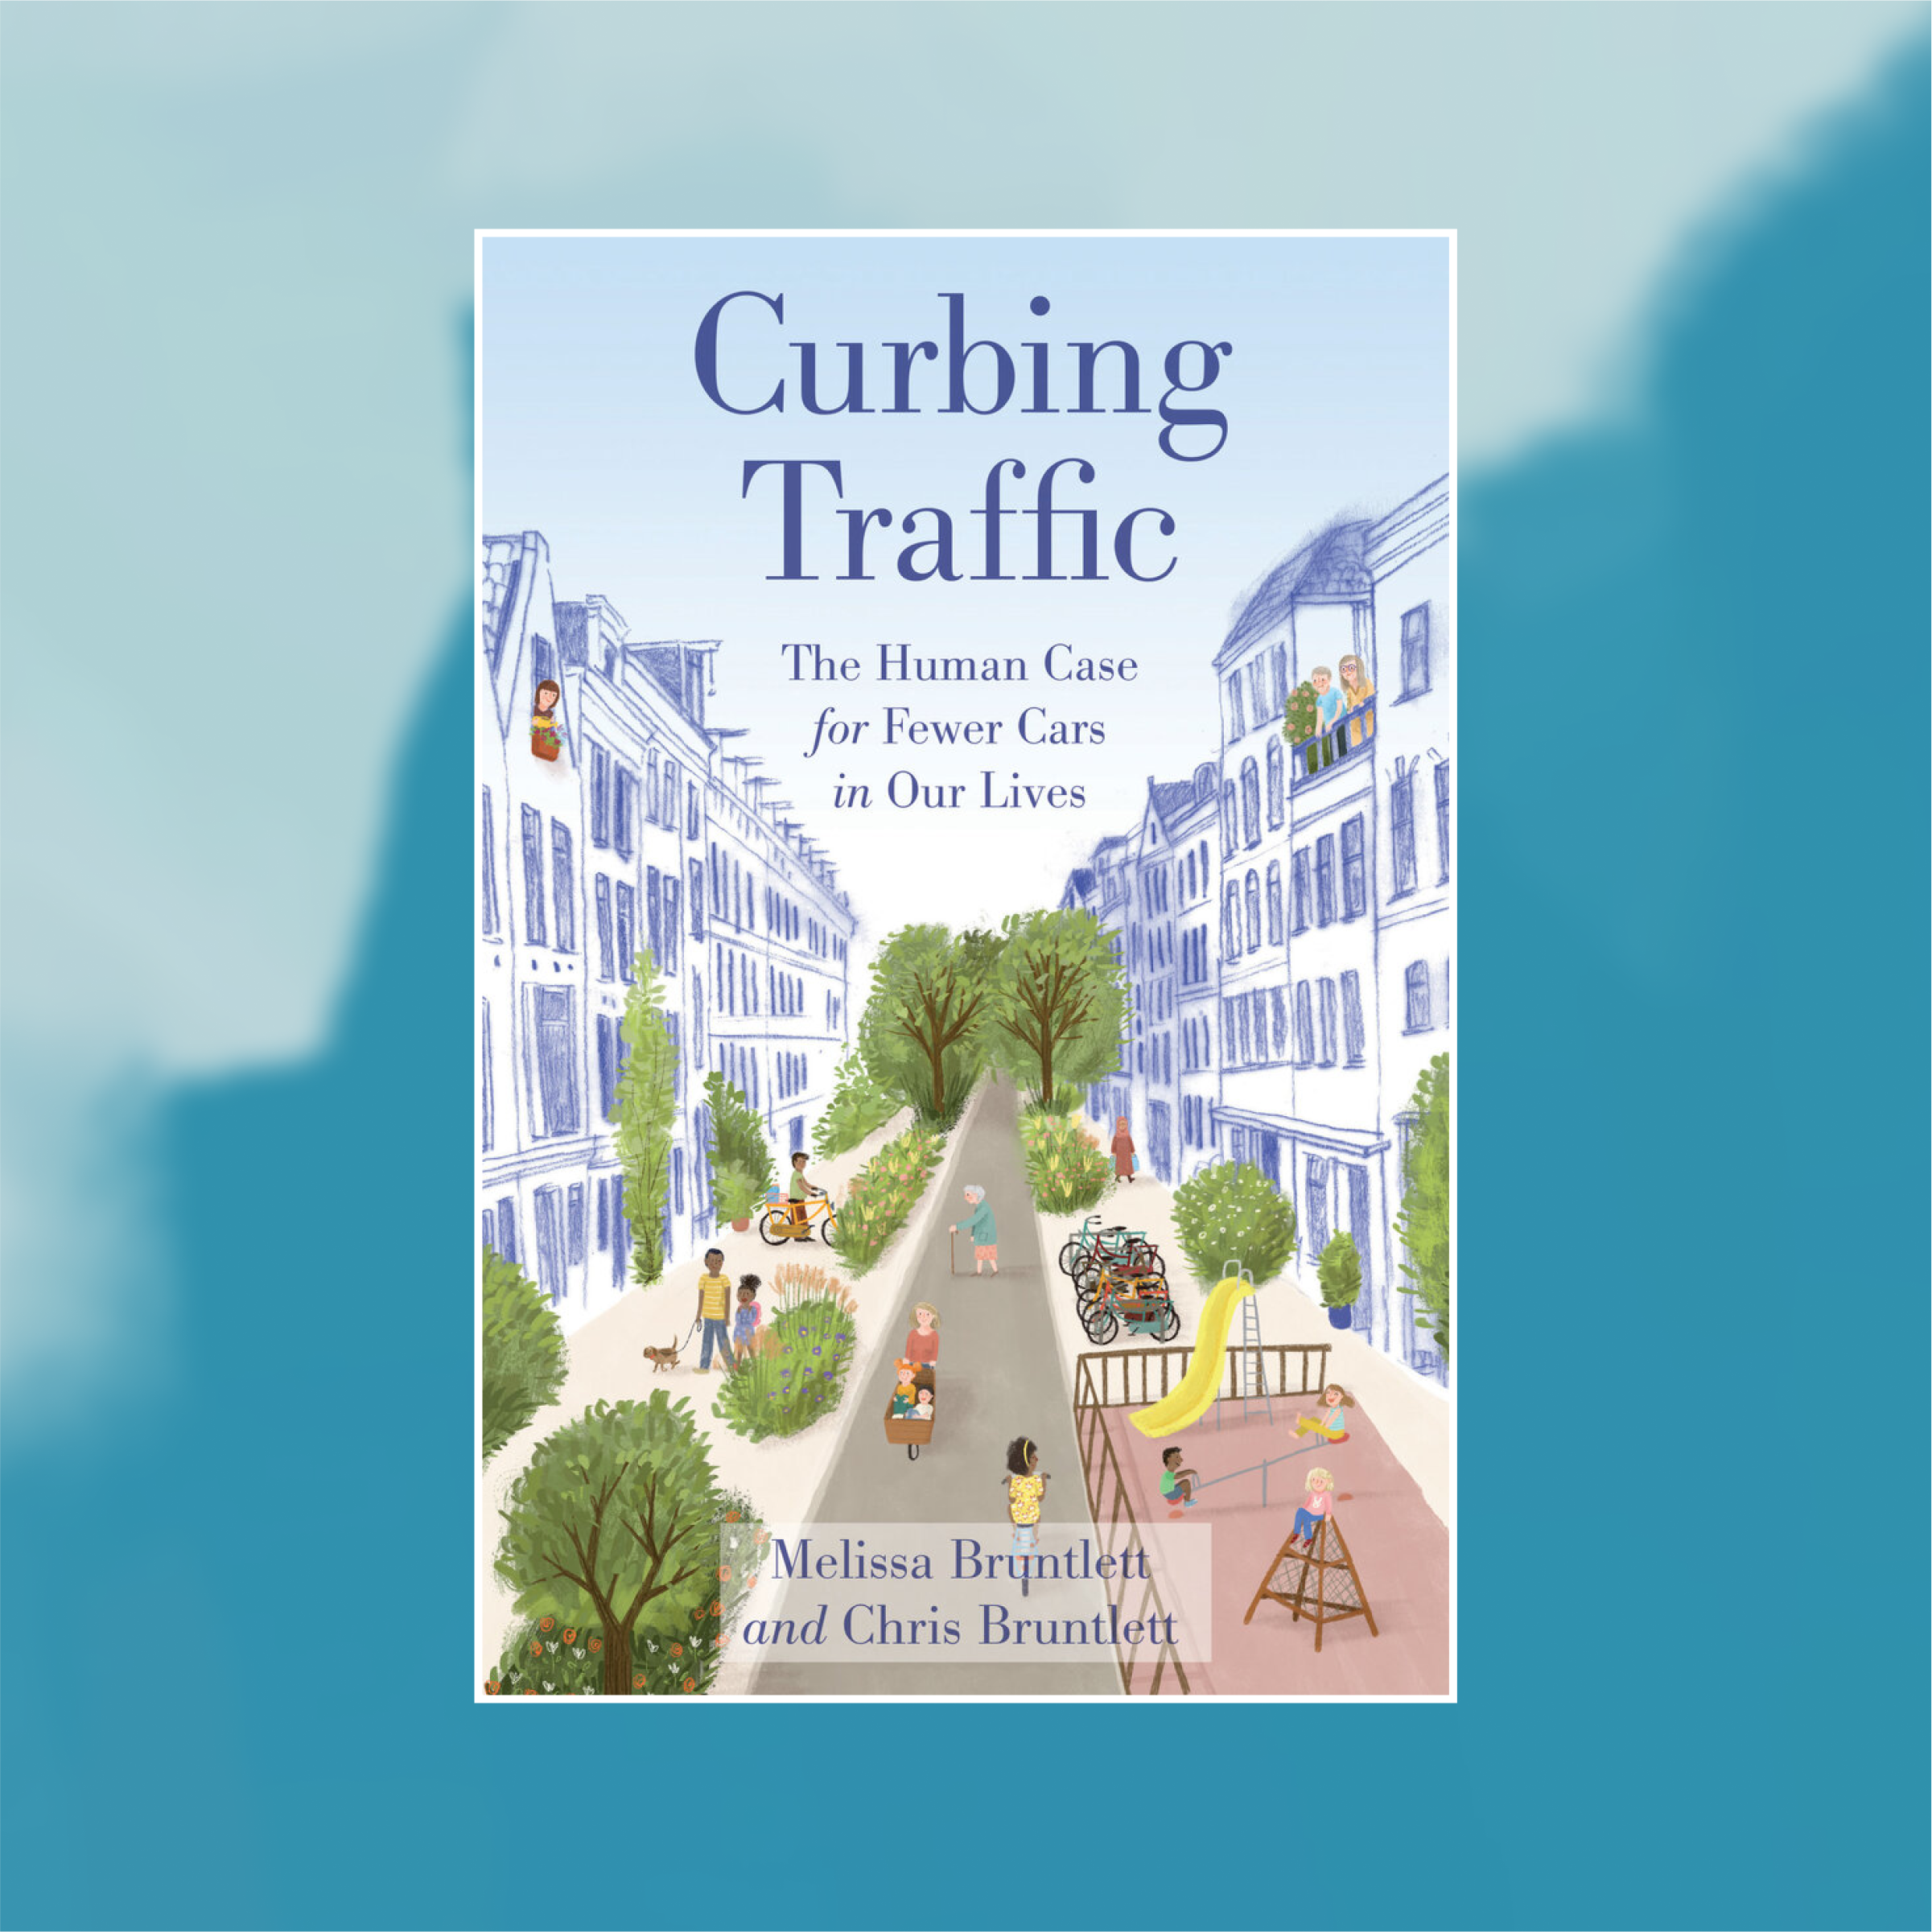 Book cover of Curbing Traffic against an abstract painted background